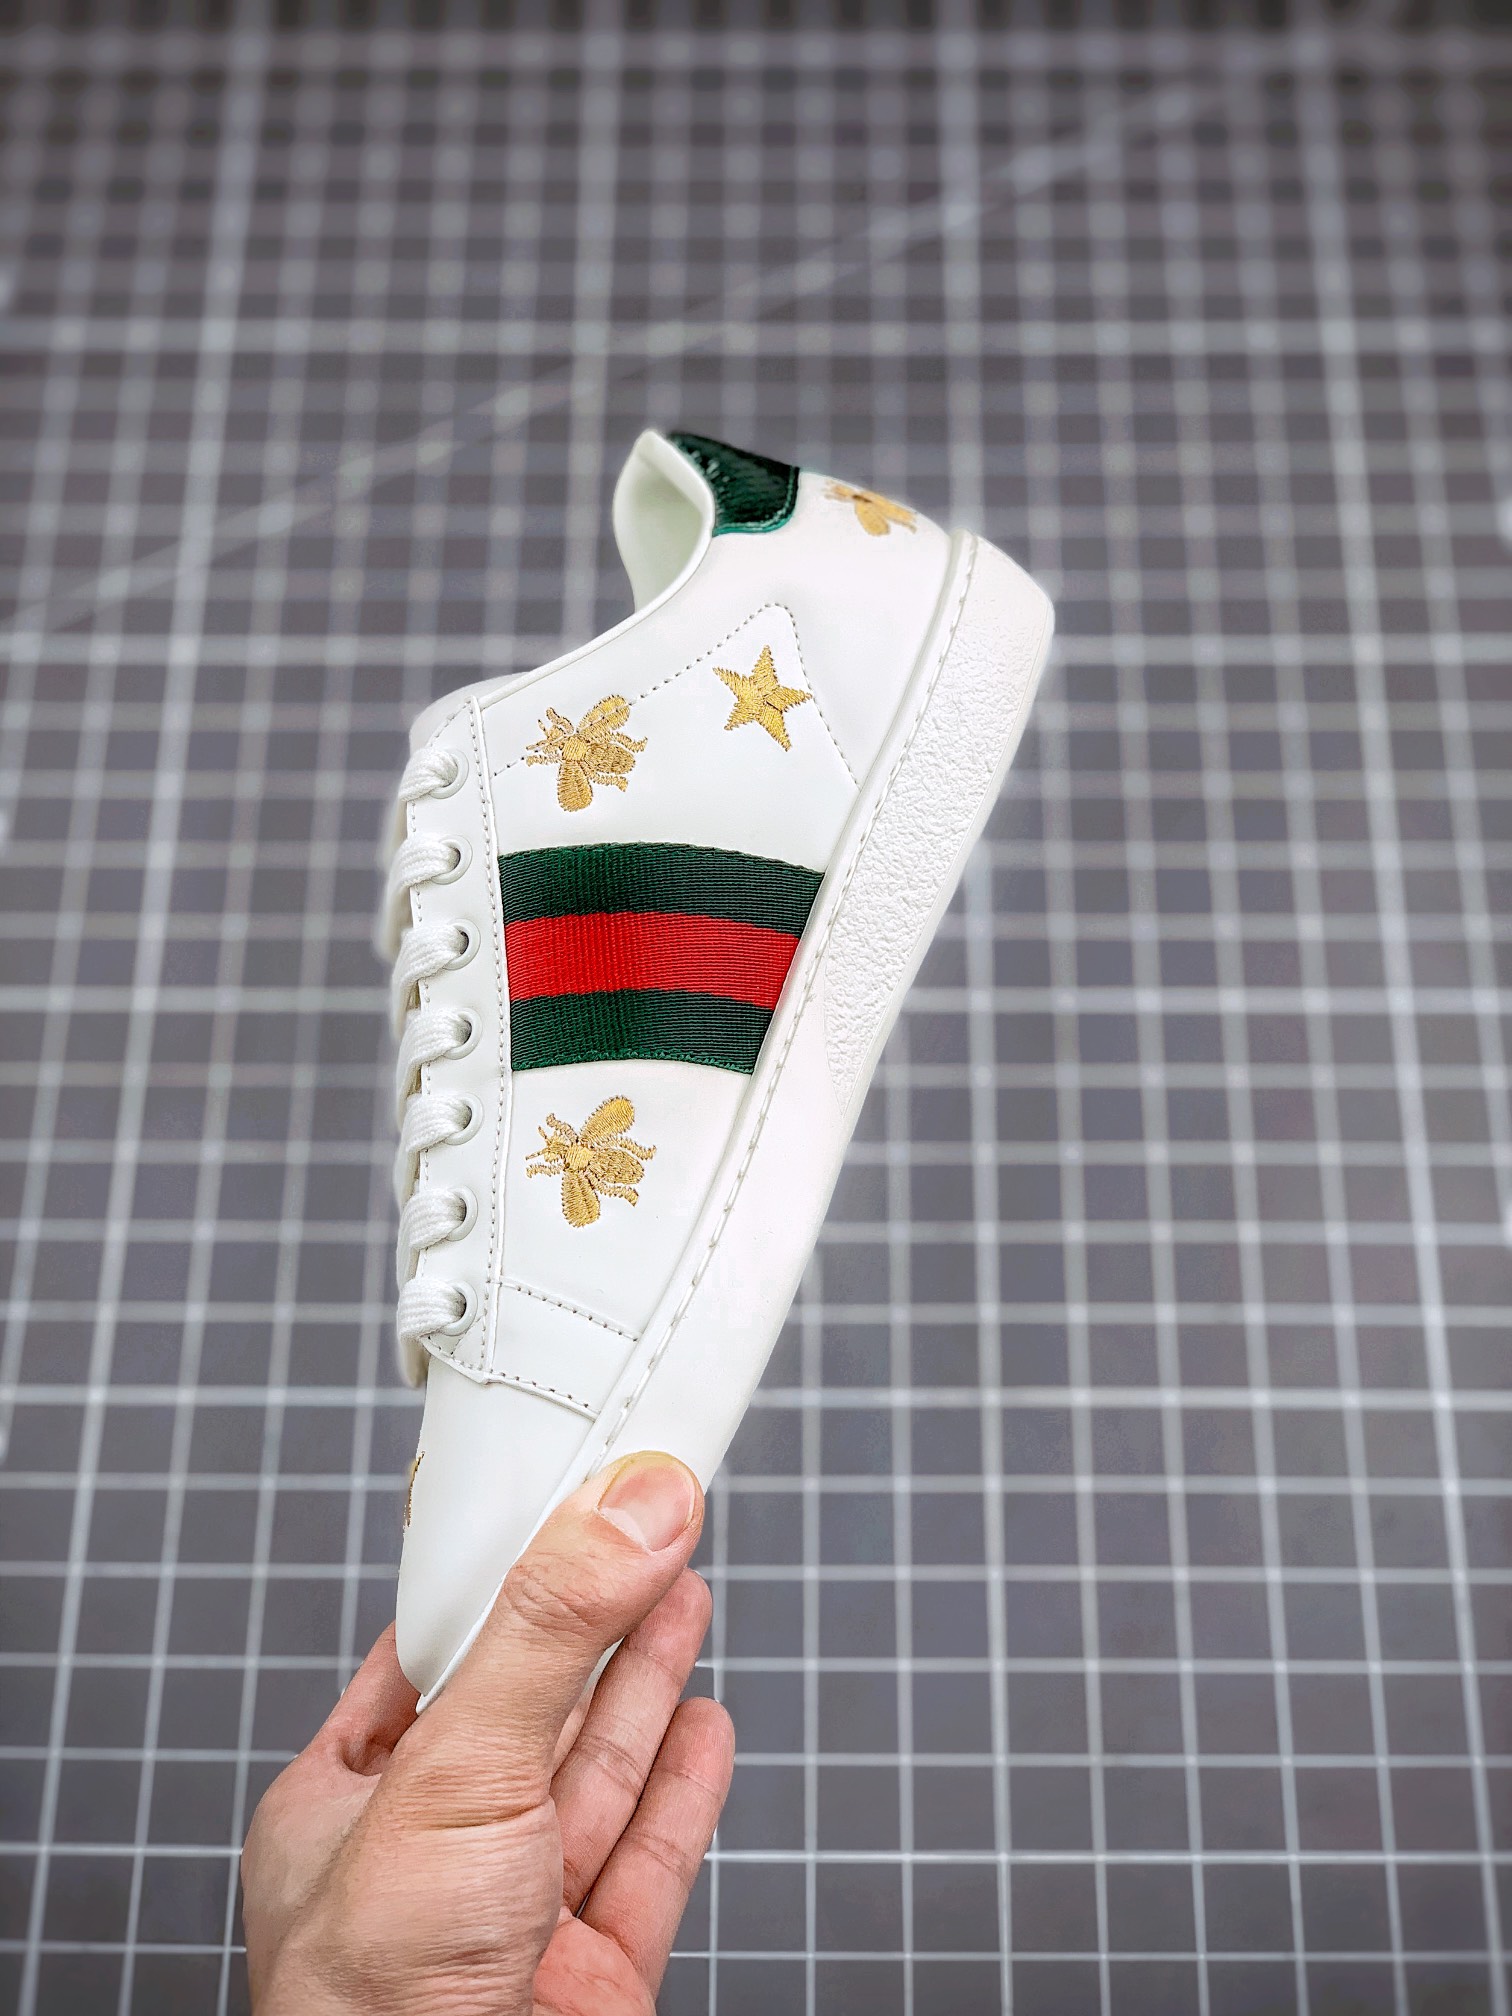 The strongest pure original purchase version chip on the market can scan Gucci white shoe series